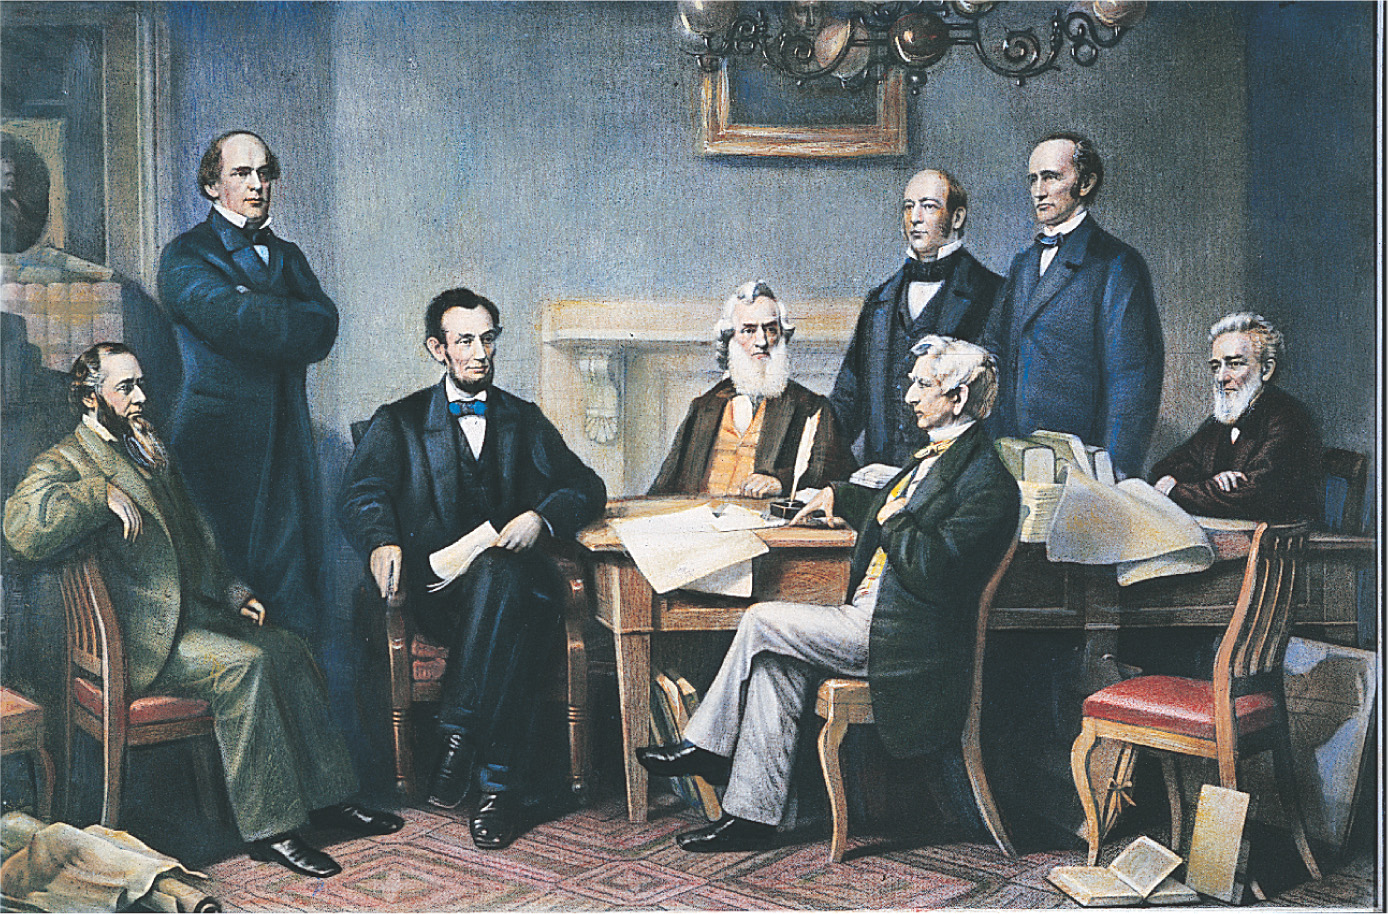 A painting: Lincoln meets with advisors.